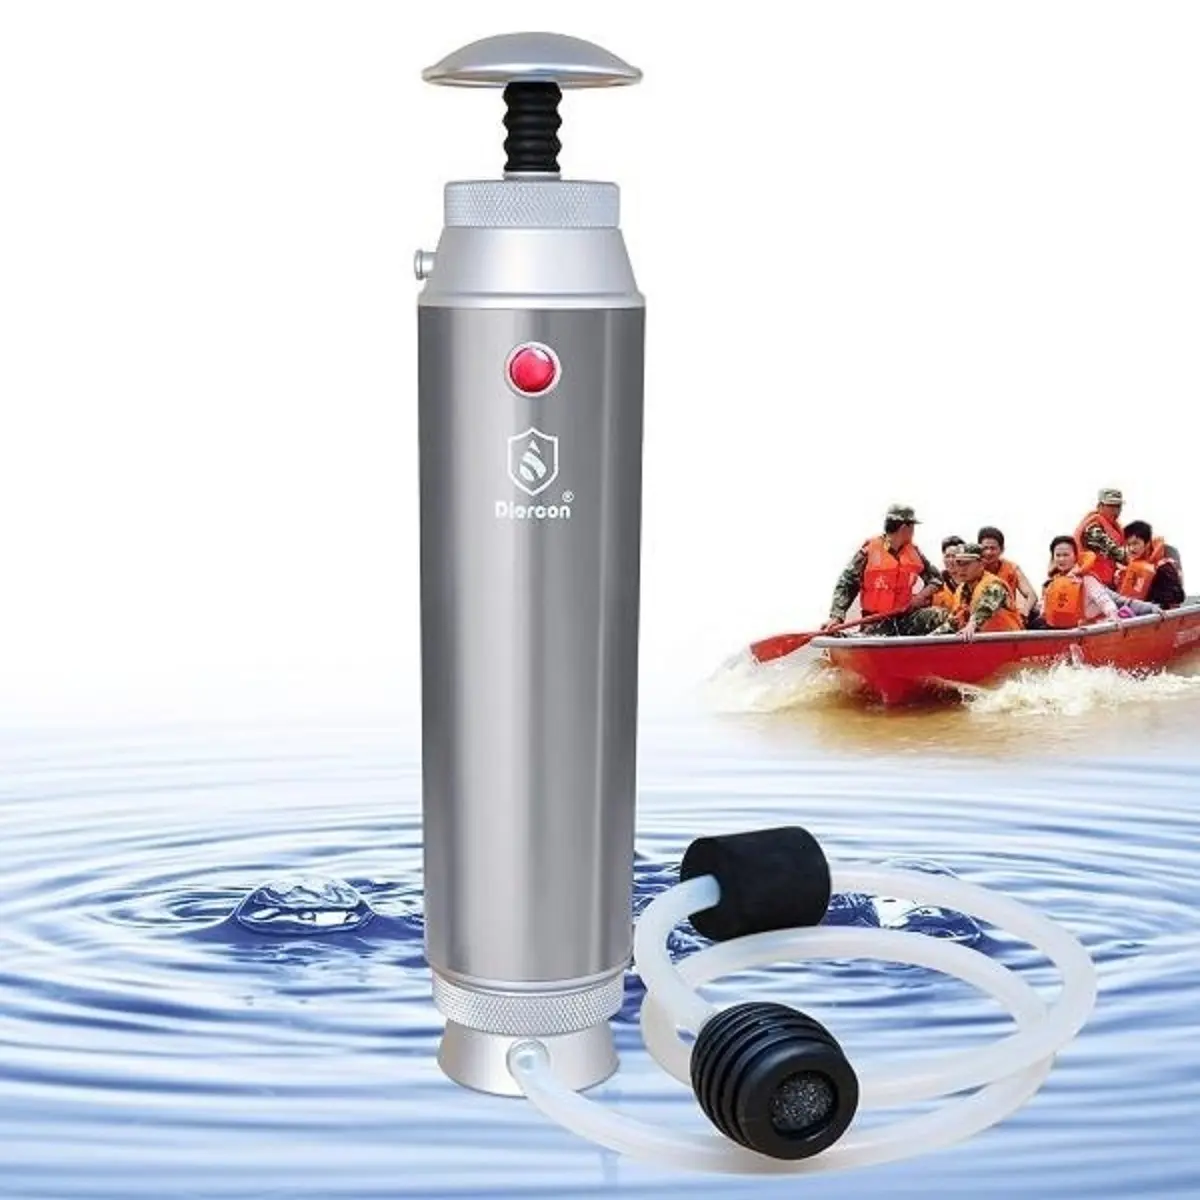 Diercon Best Sales Portable Travel Water Purifier Outdoor Efficient Water Filter for Camping Hiking and Survive